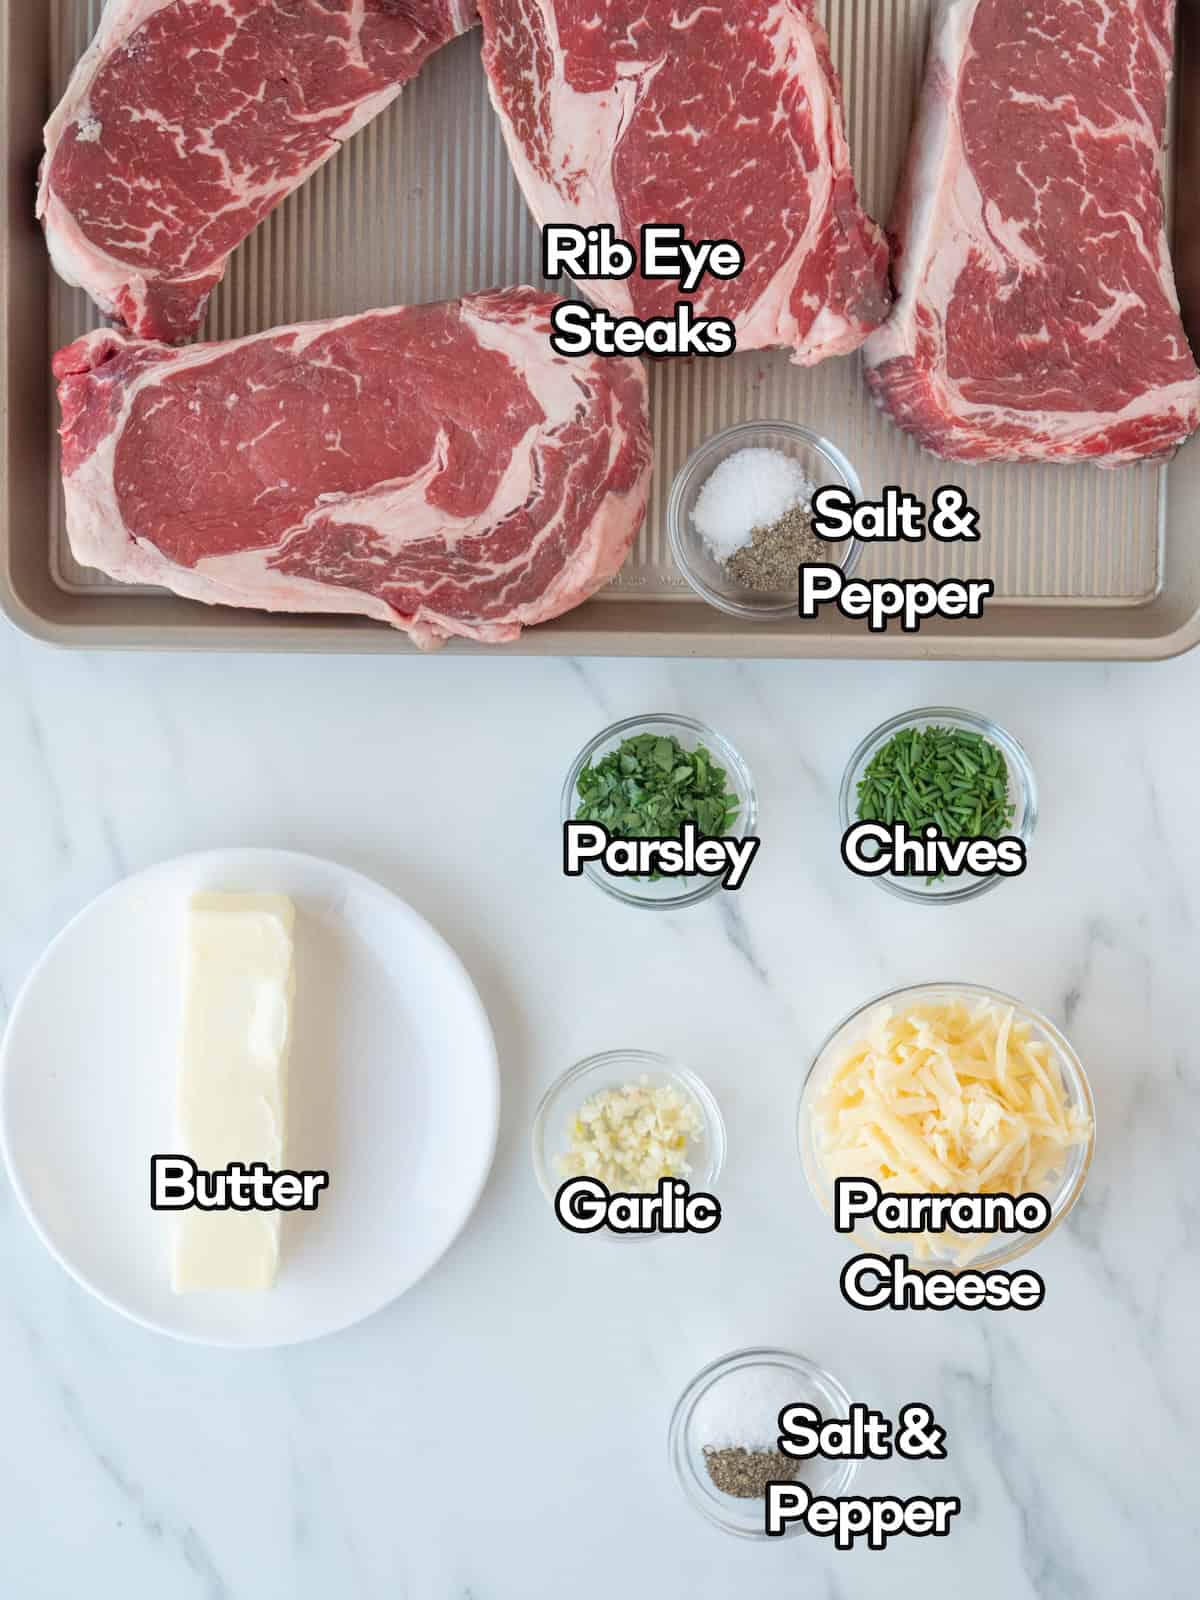 Mise en place of all ingredients to make grilled rib eye steaks with compound butter.